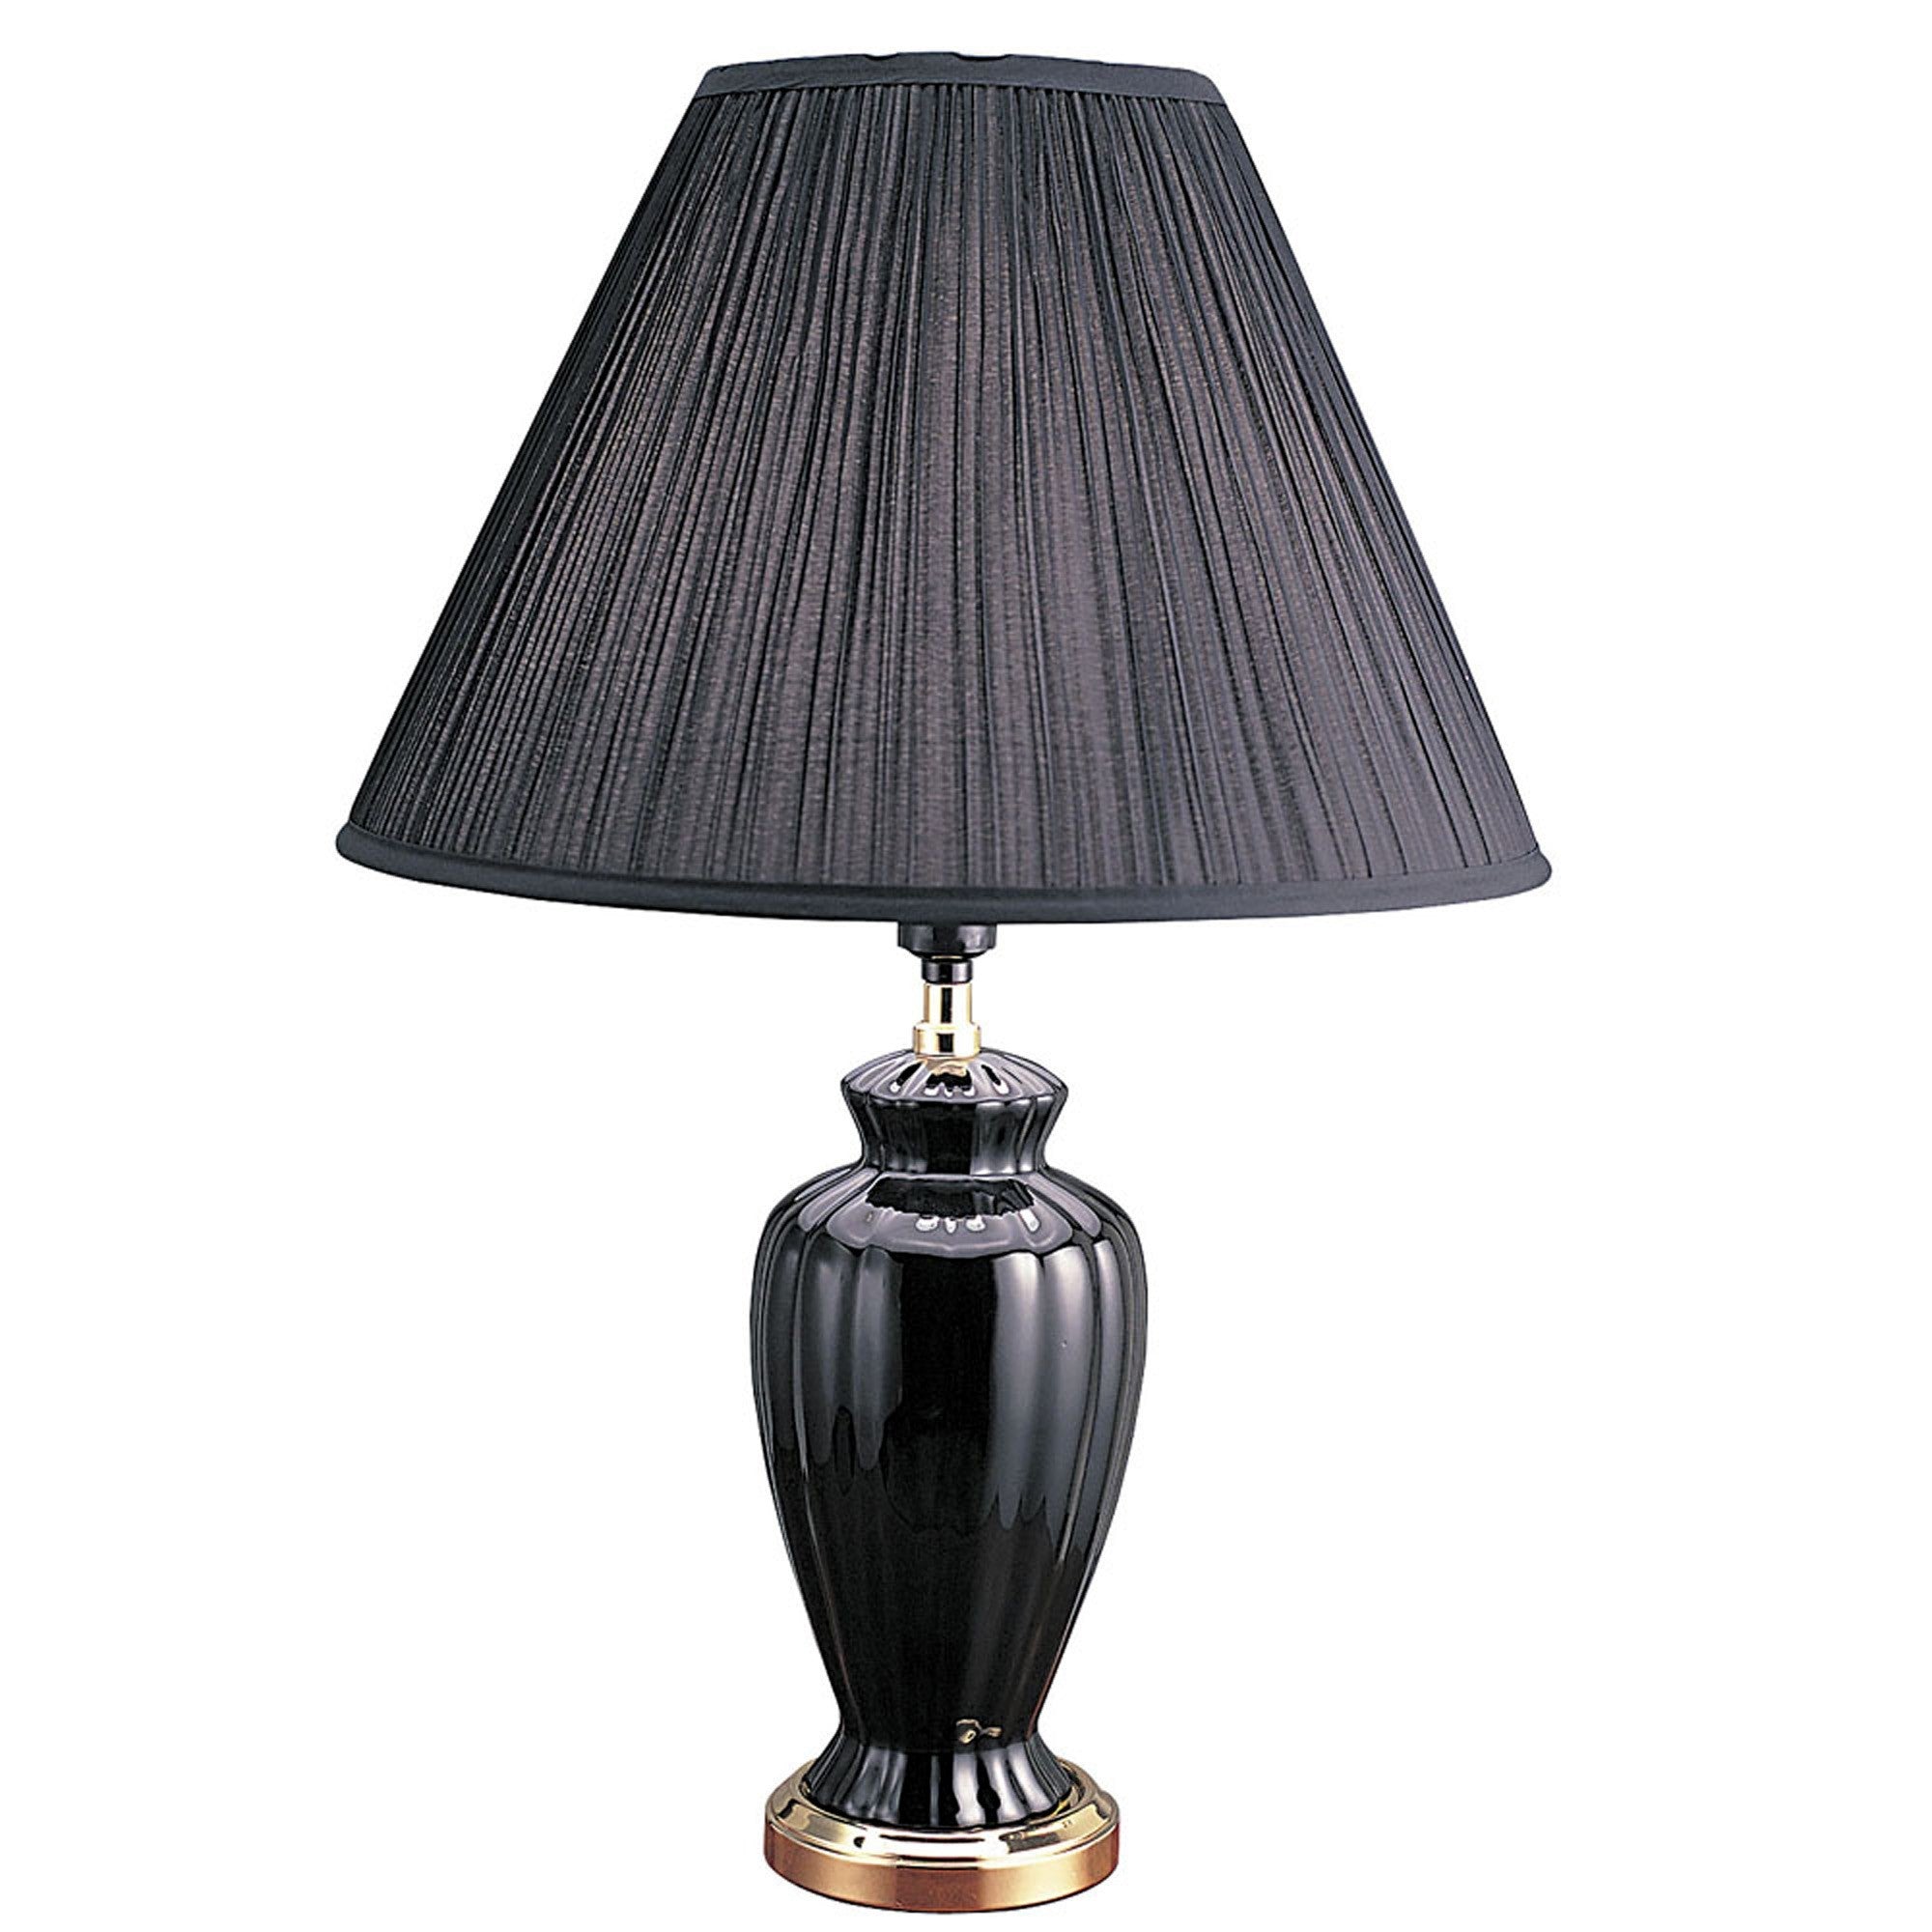 26" Gold Bedside Table Lamp With Black Empire Shade